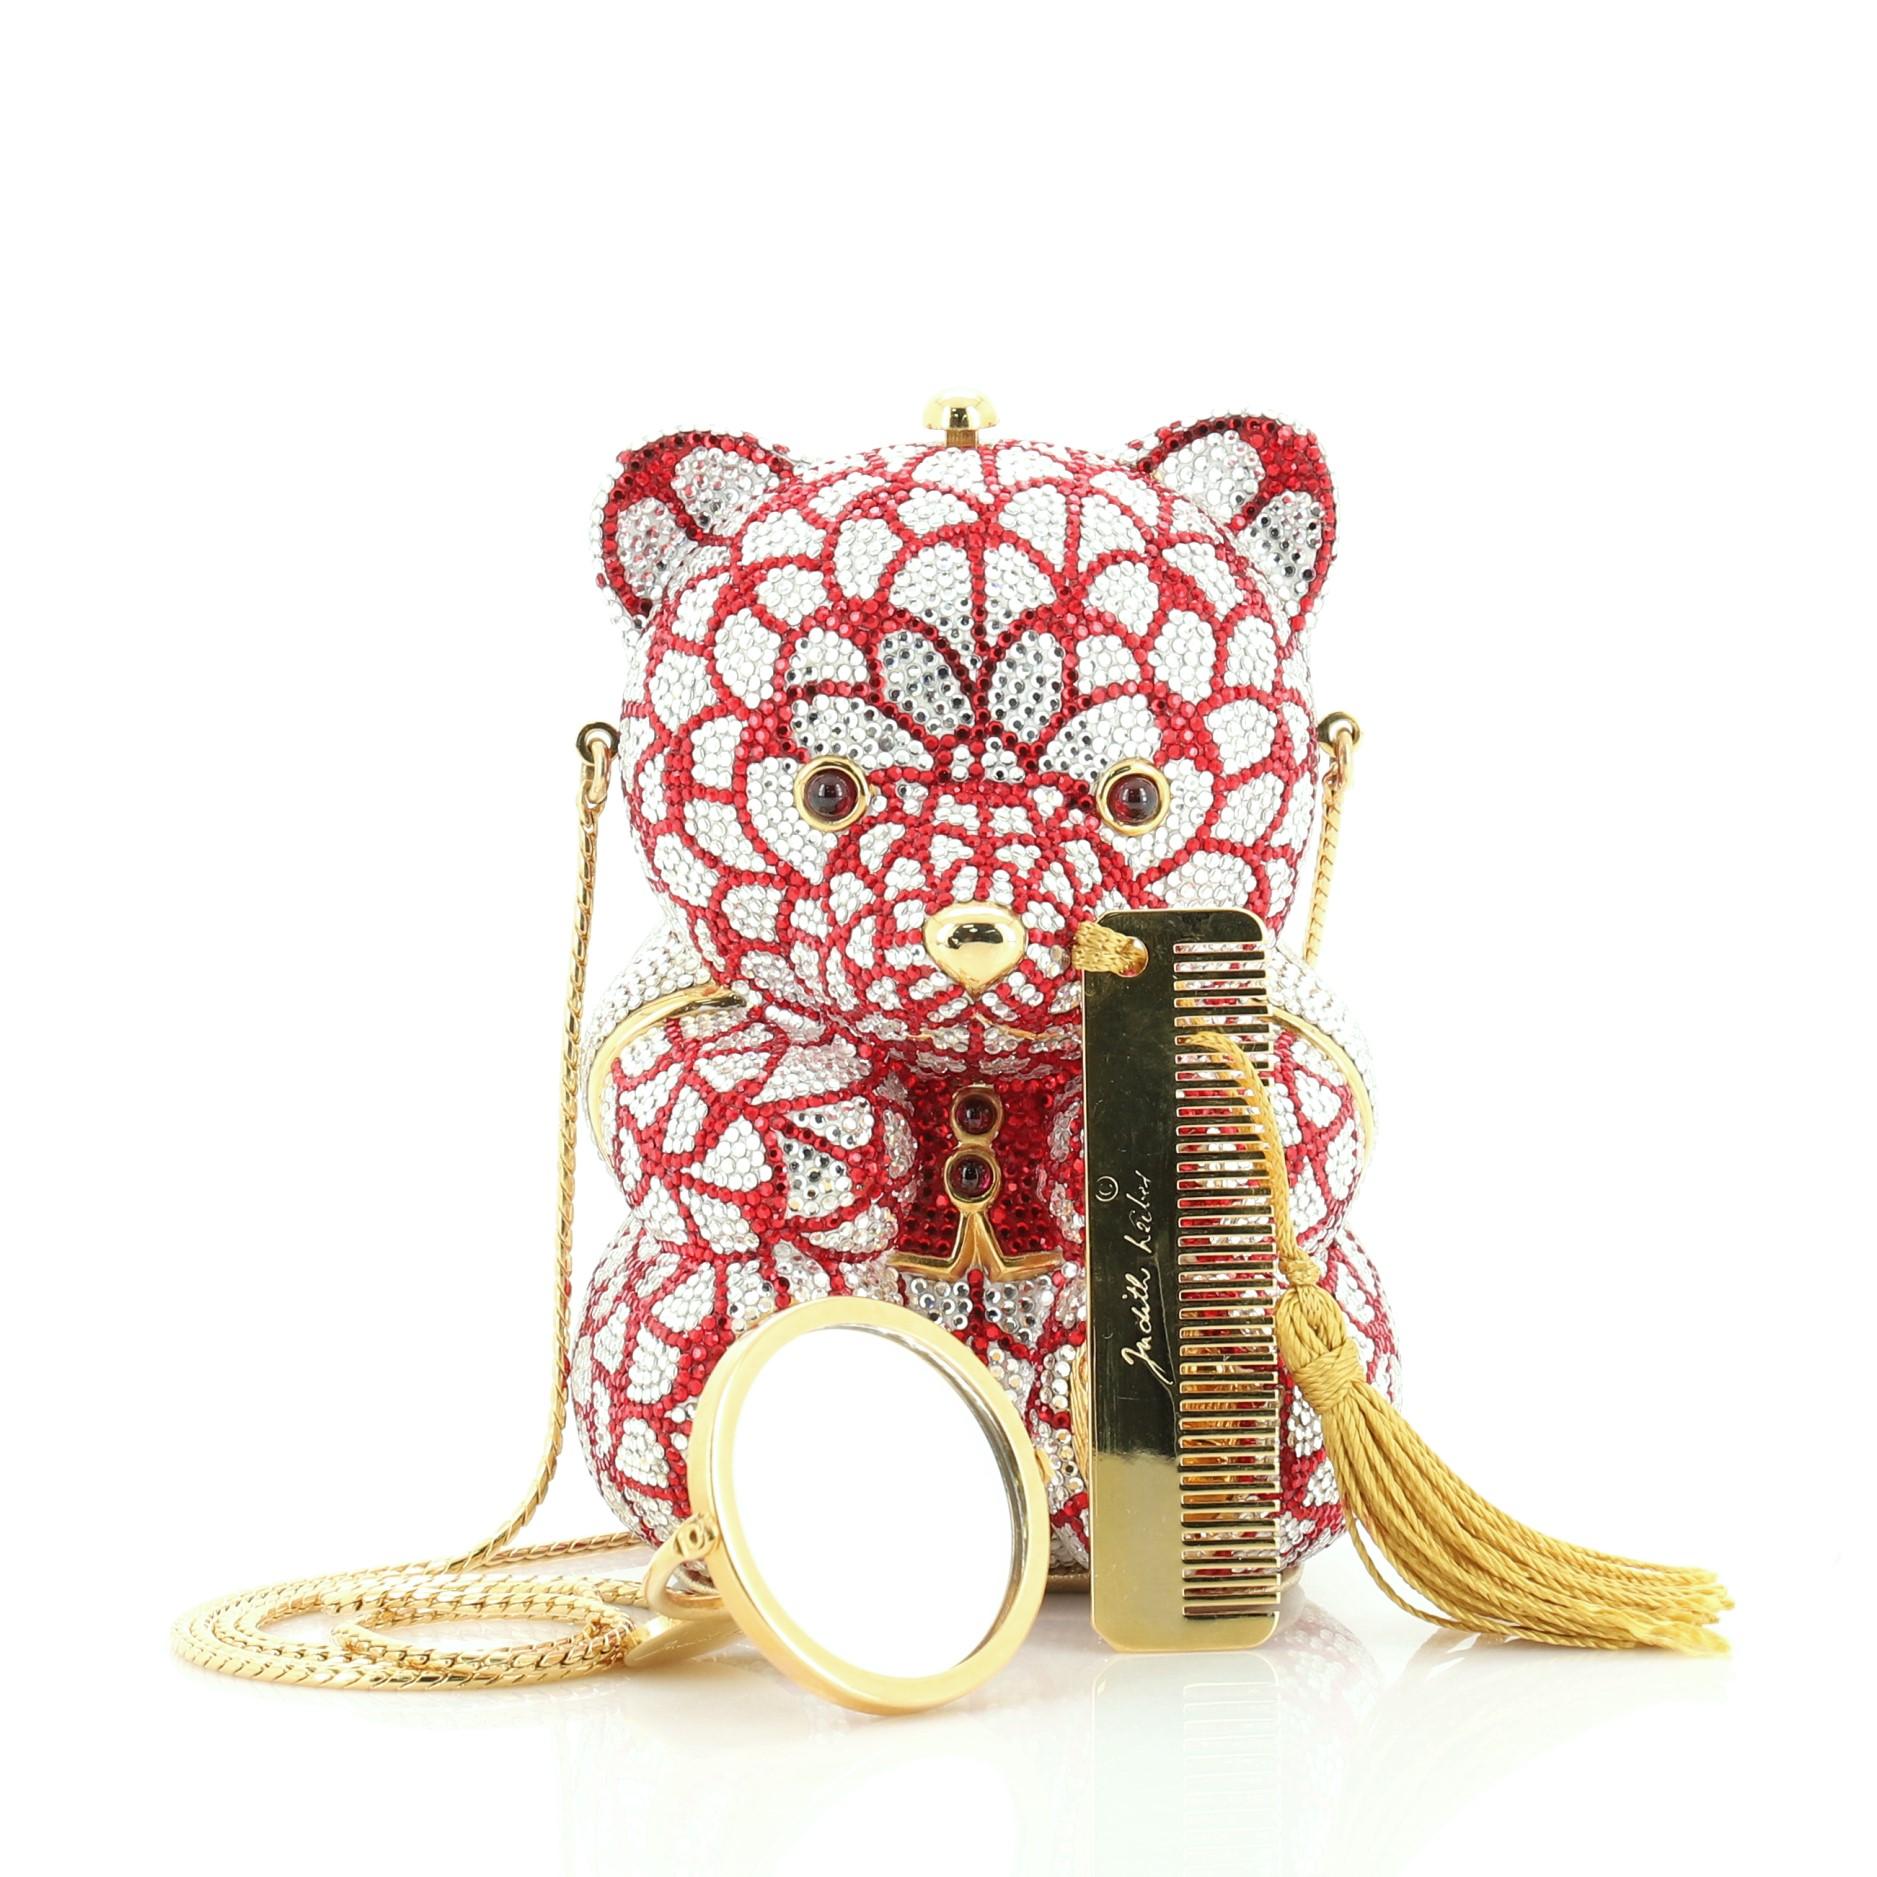 This Judith Leiber Teddy Bear Minaudiere Crystal Small, crafted from gold, red, white rhinestone, features long hidden gold chain shoulder strap, teddy bear silhouette, red crystals for the vest and gold-tone hardware. Its top-center push-lock